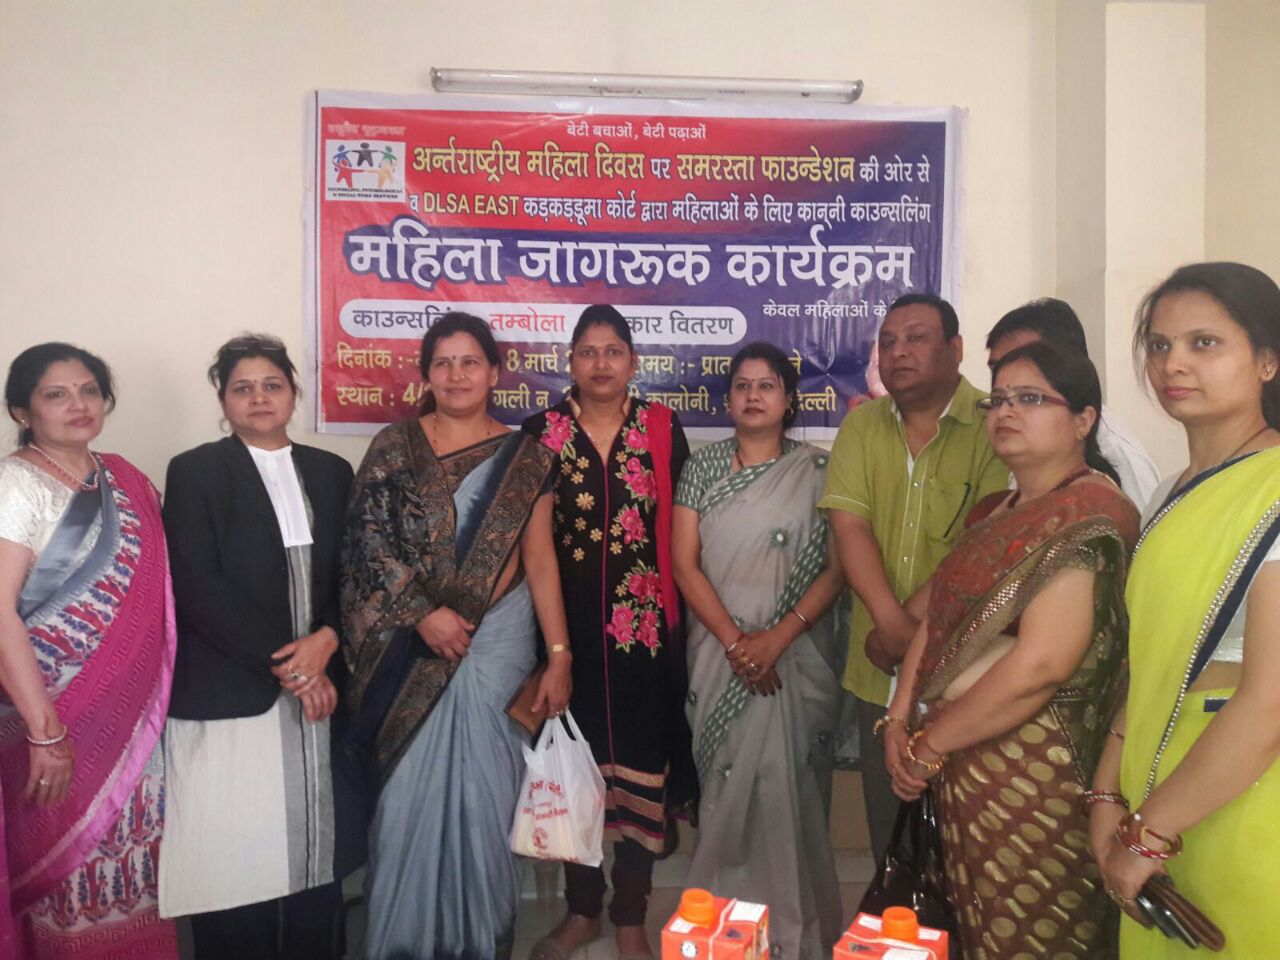 International Women Day of Awareness Programme on Child Abuse, Sexual Harassment at Work Place and Women Safety  at “SAARTHI CHARITABLE TRUST” on 08.03.2016.